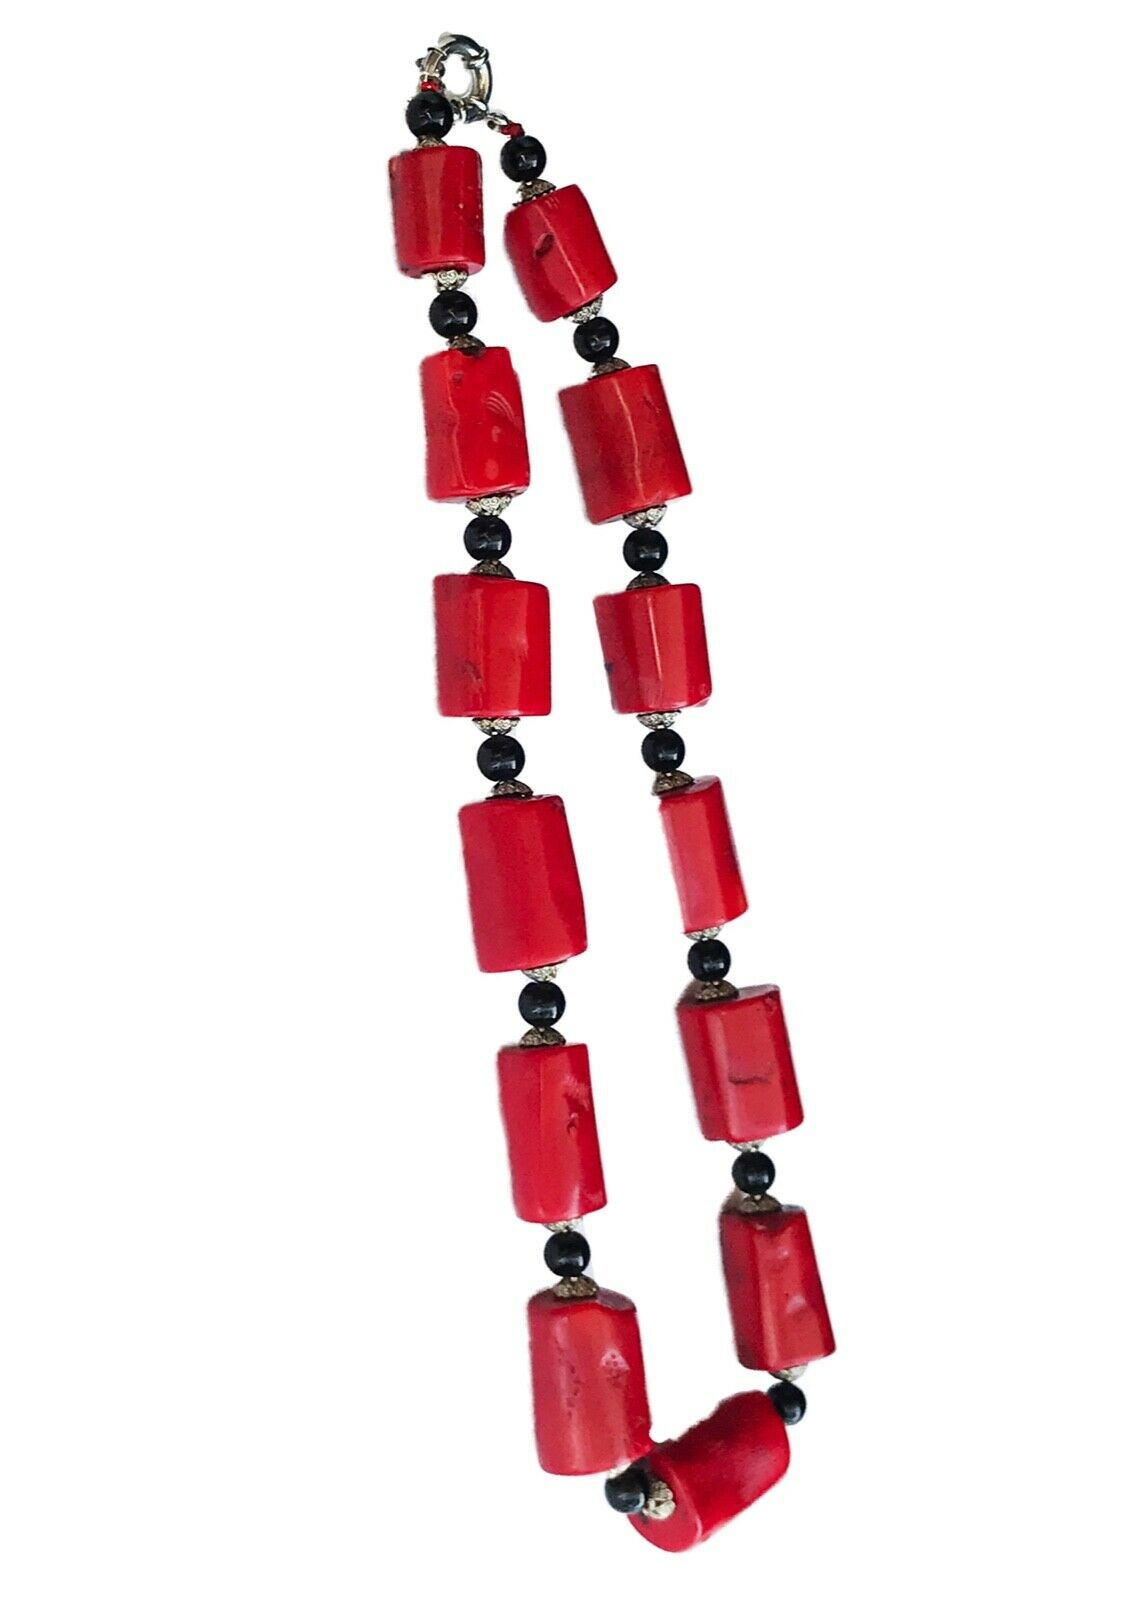 Superb Nepalese  Natural Red Coral  Beads Necklace 13 beads